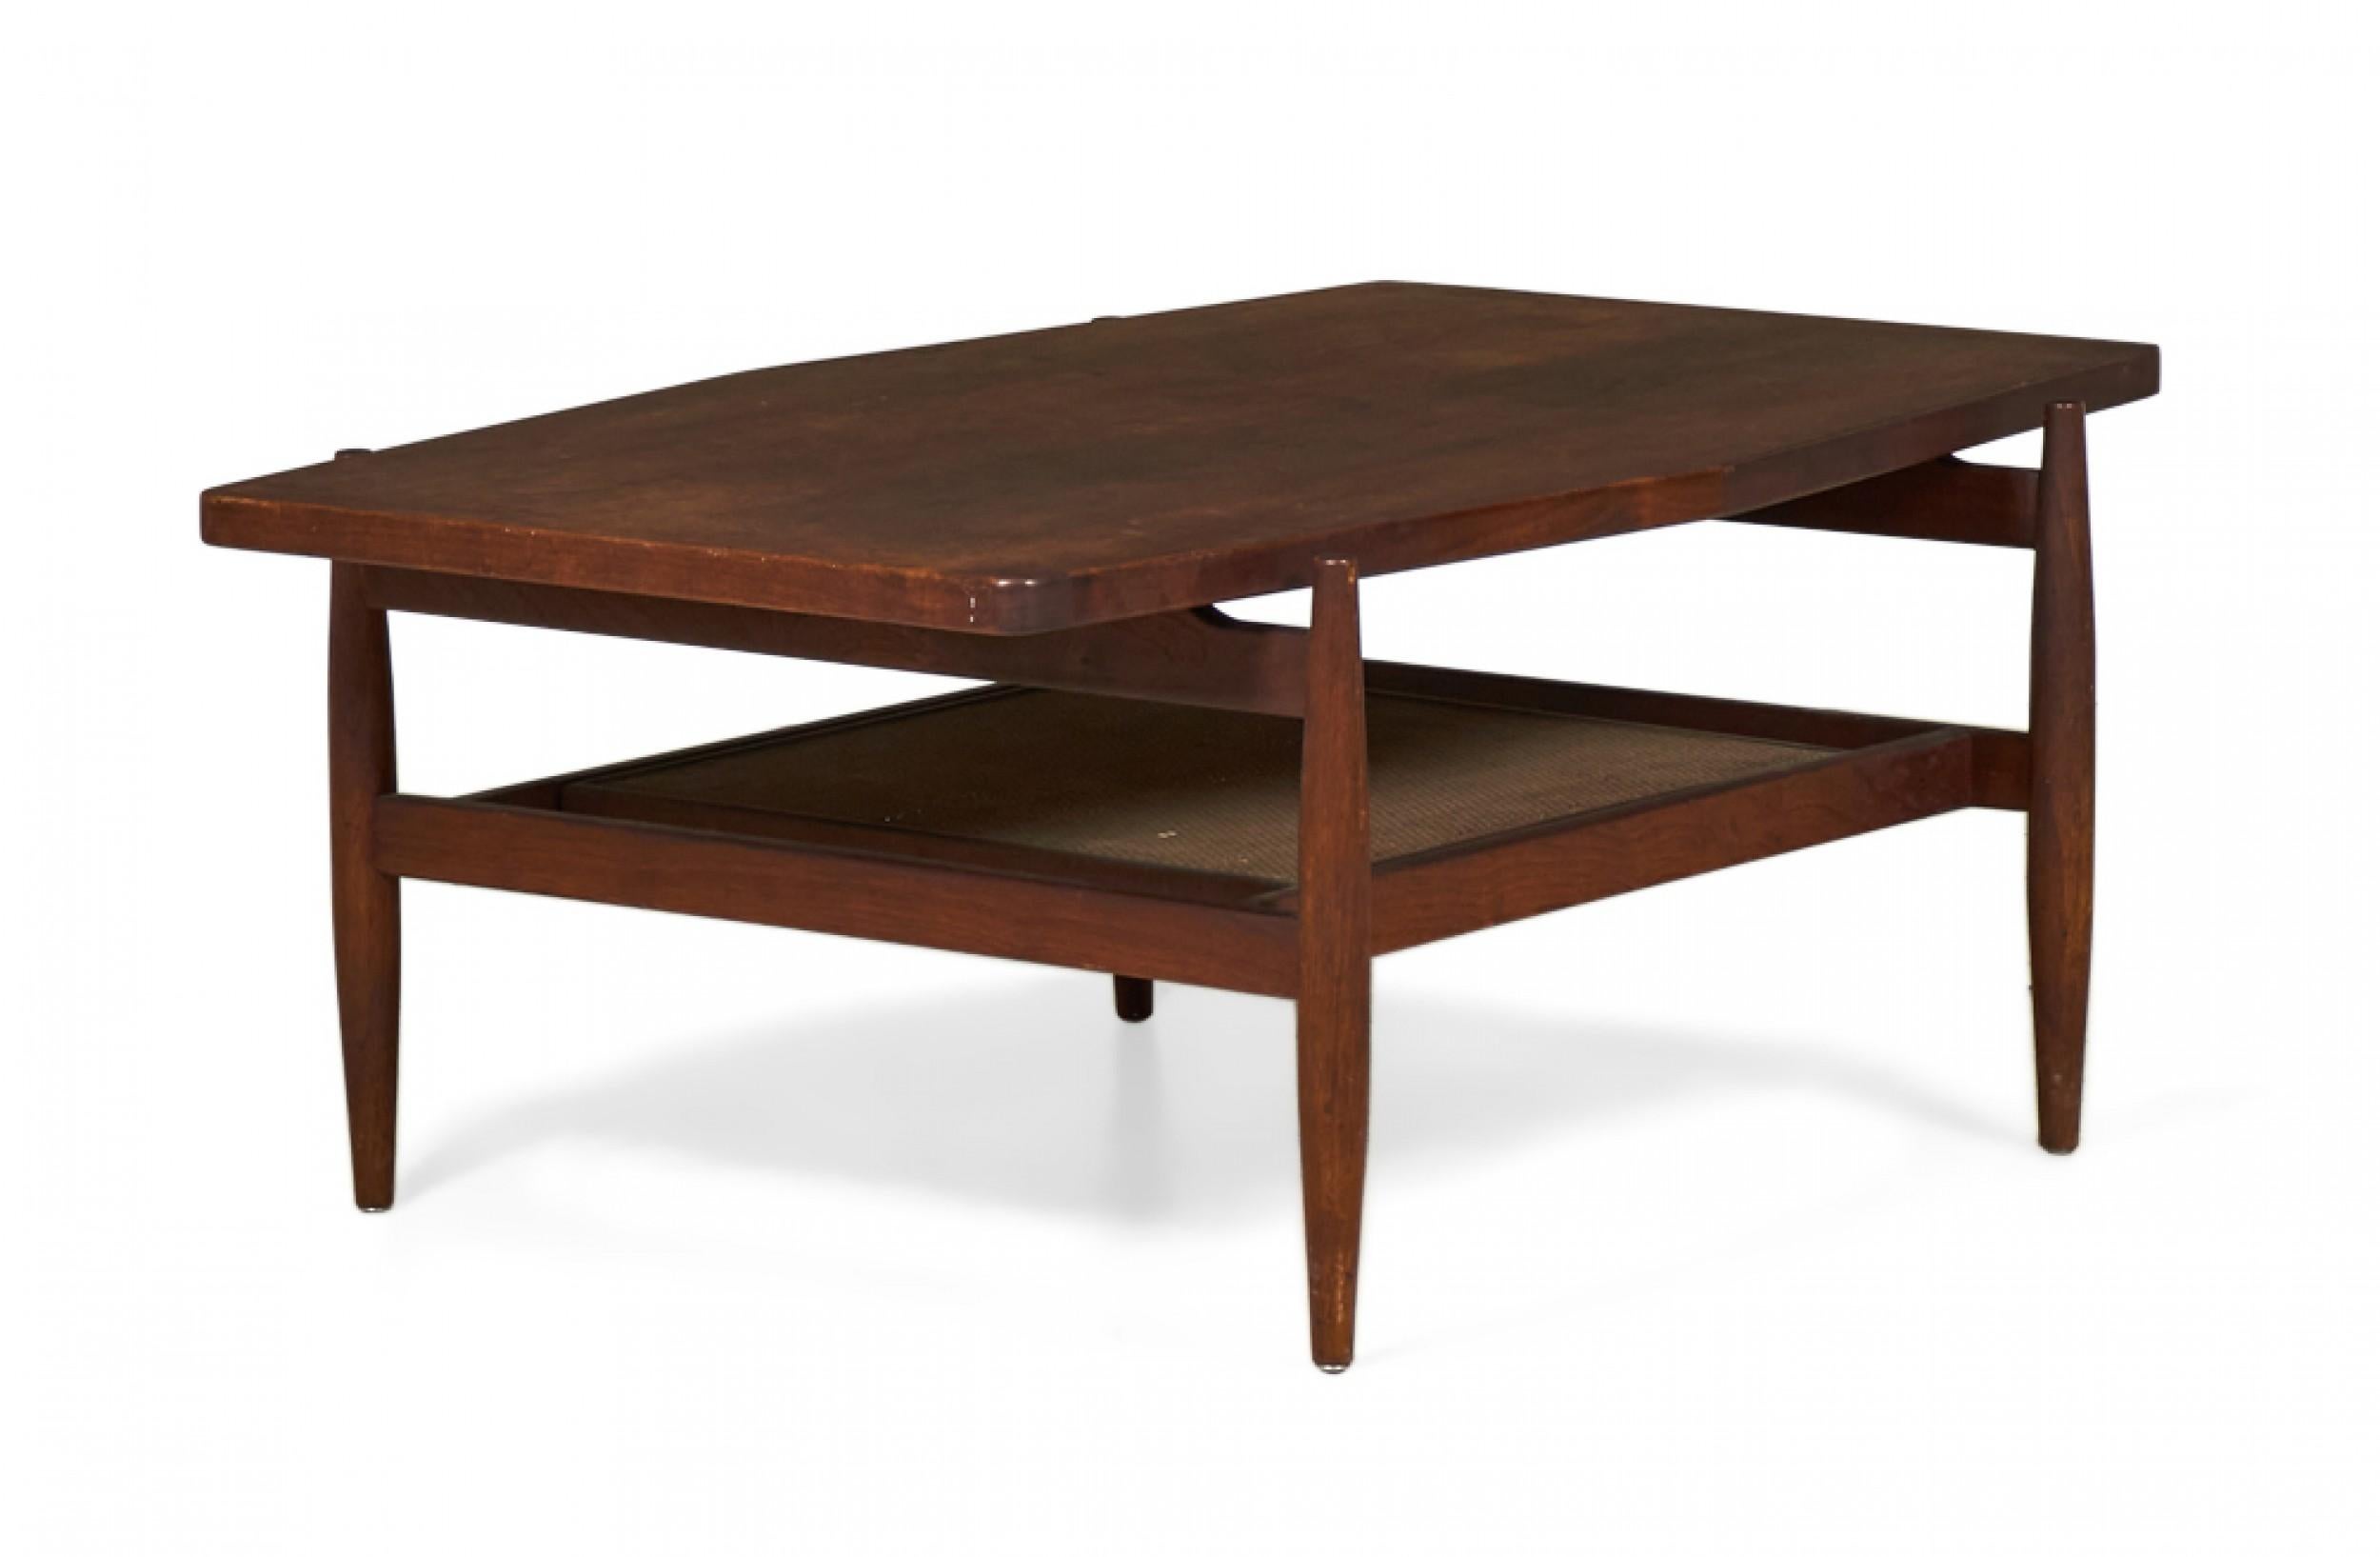 Wood Jens Risom Mid-Century Diamond Top Walnut and Caning Coffee Table For Sale